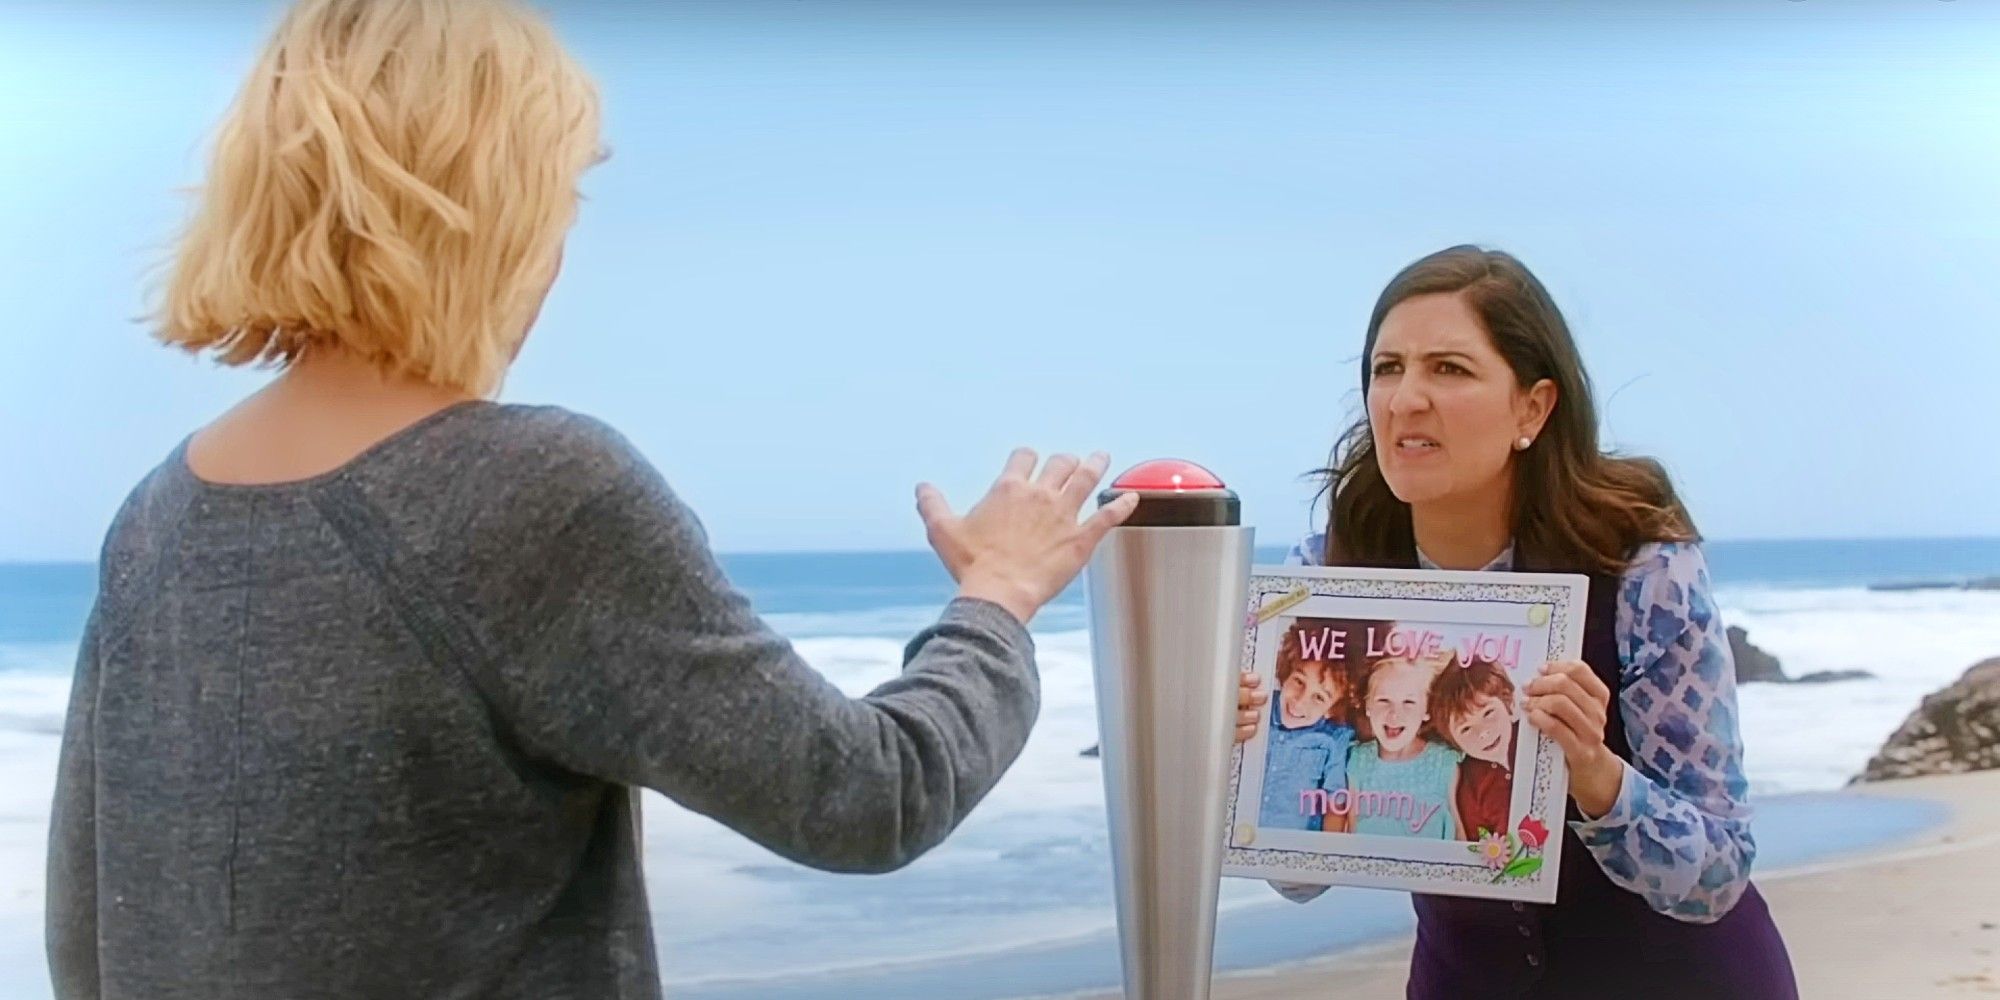 Eleanor Shellstrop pressing the button to kill Janet, who is holding a photo of three kids that says "WE LOVE YOU MOMMY" on The Good Place